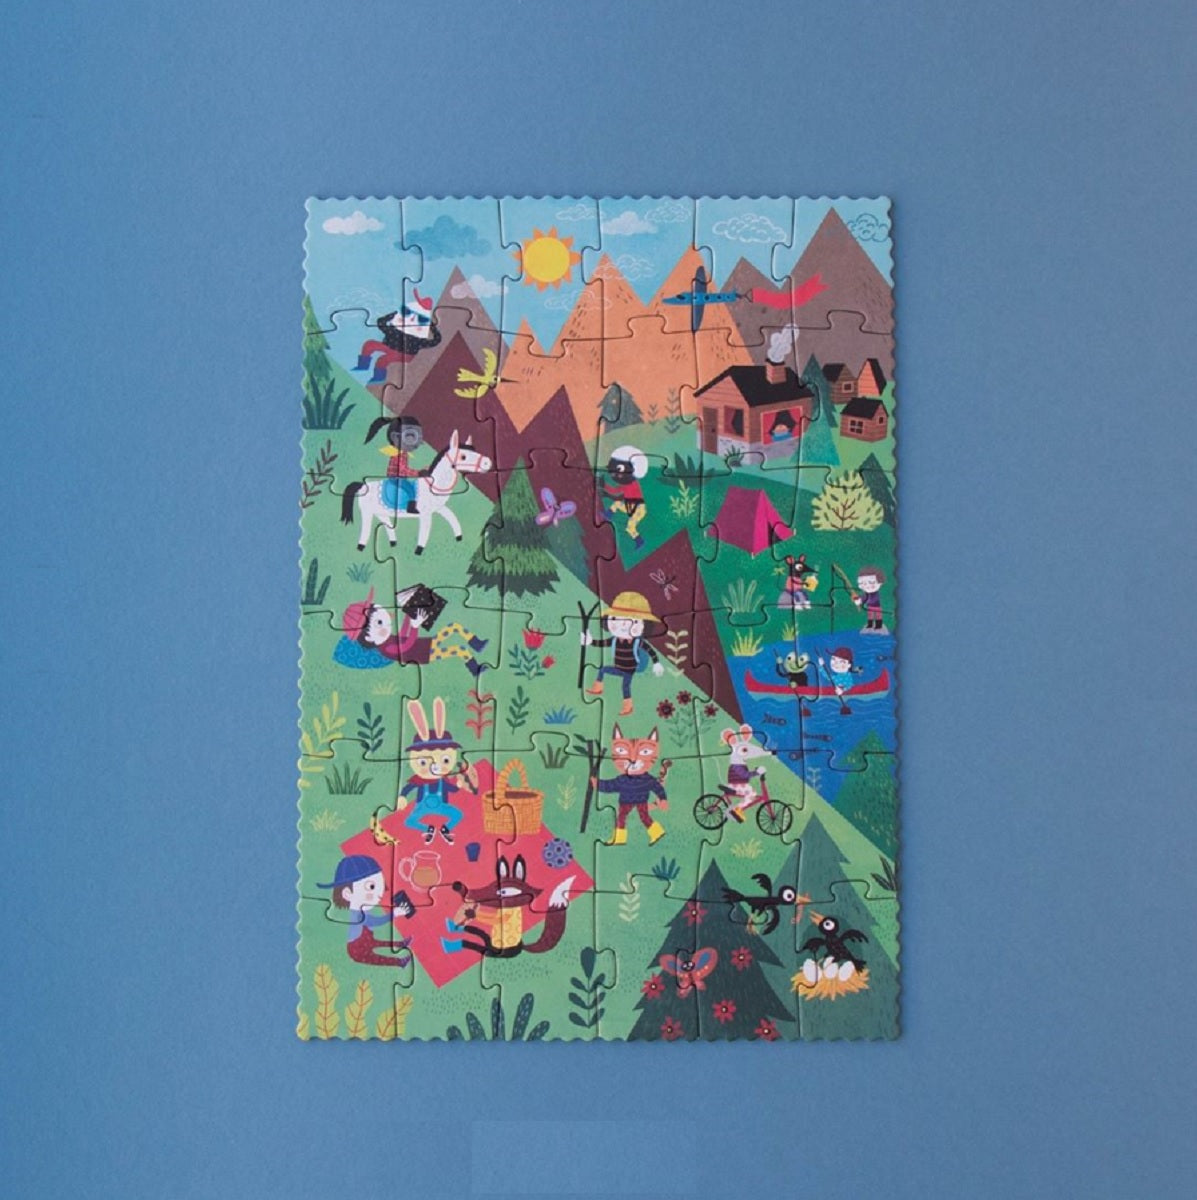 Londji Let's Go To the Mountains Puzzle